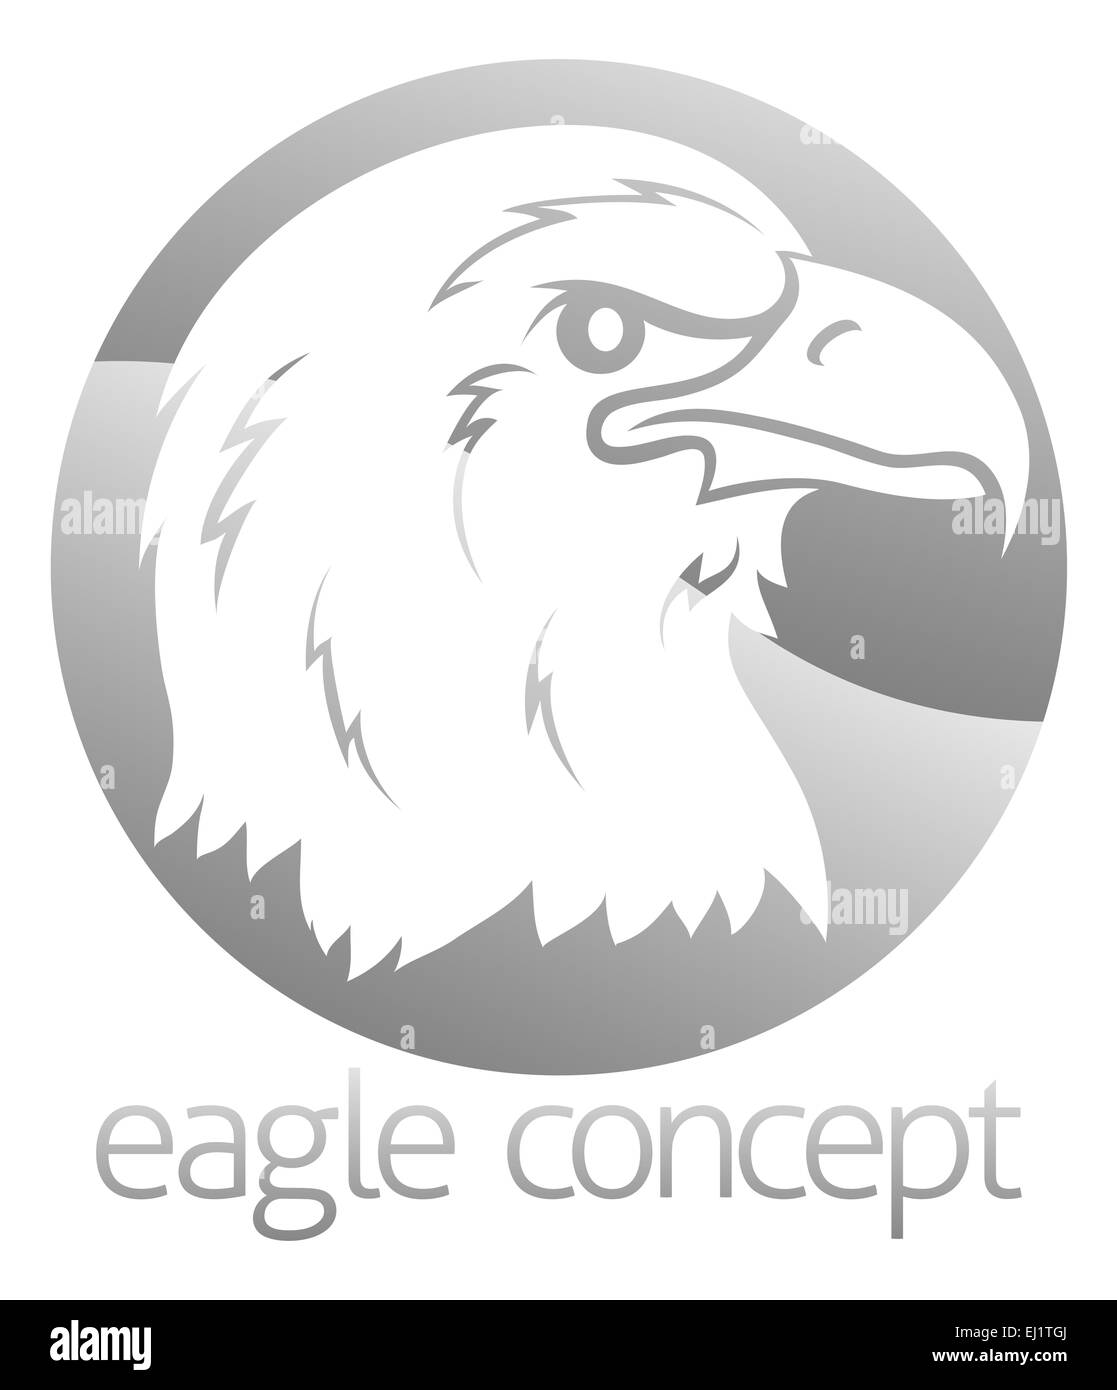 An abstract conceptual illustration of a proud eagles head circle design Stock Photo